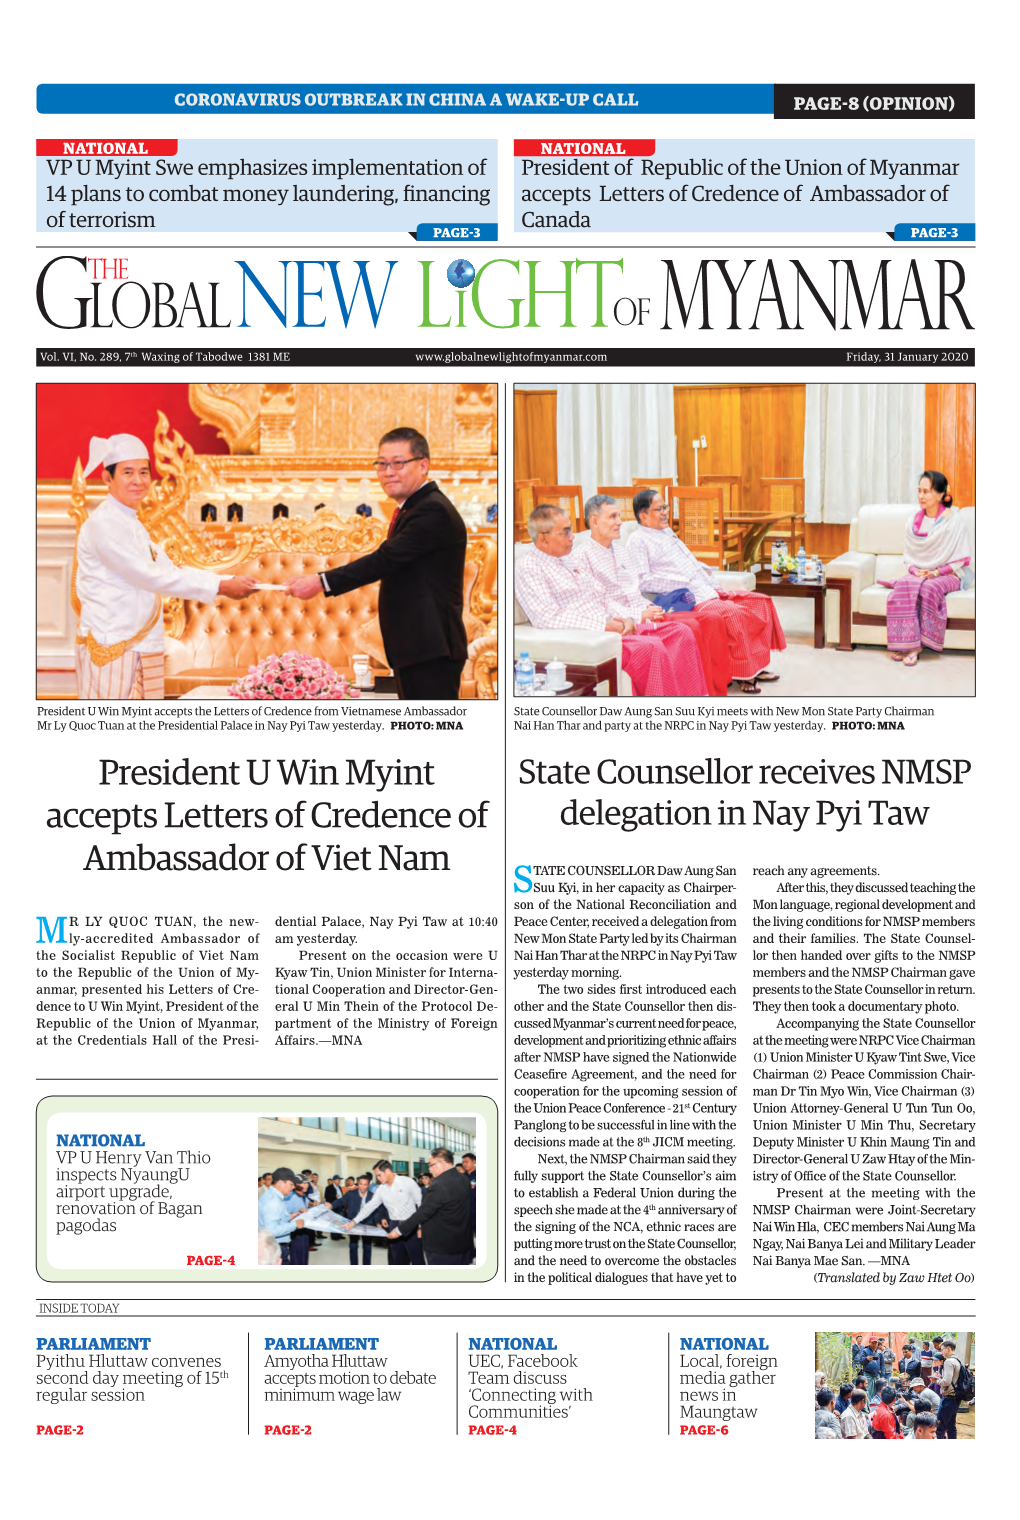 President U Win Myint Accepts Letters of Credence of Ambassador of Viet